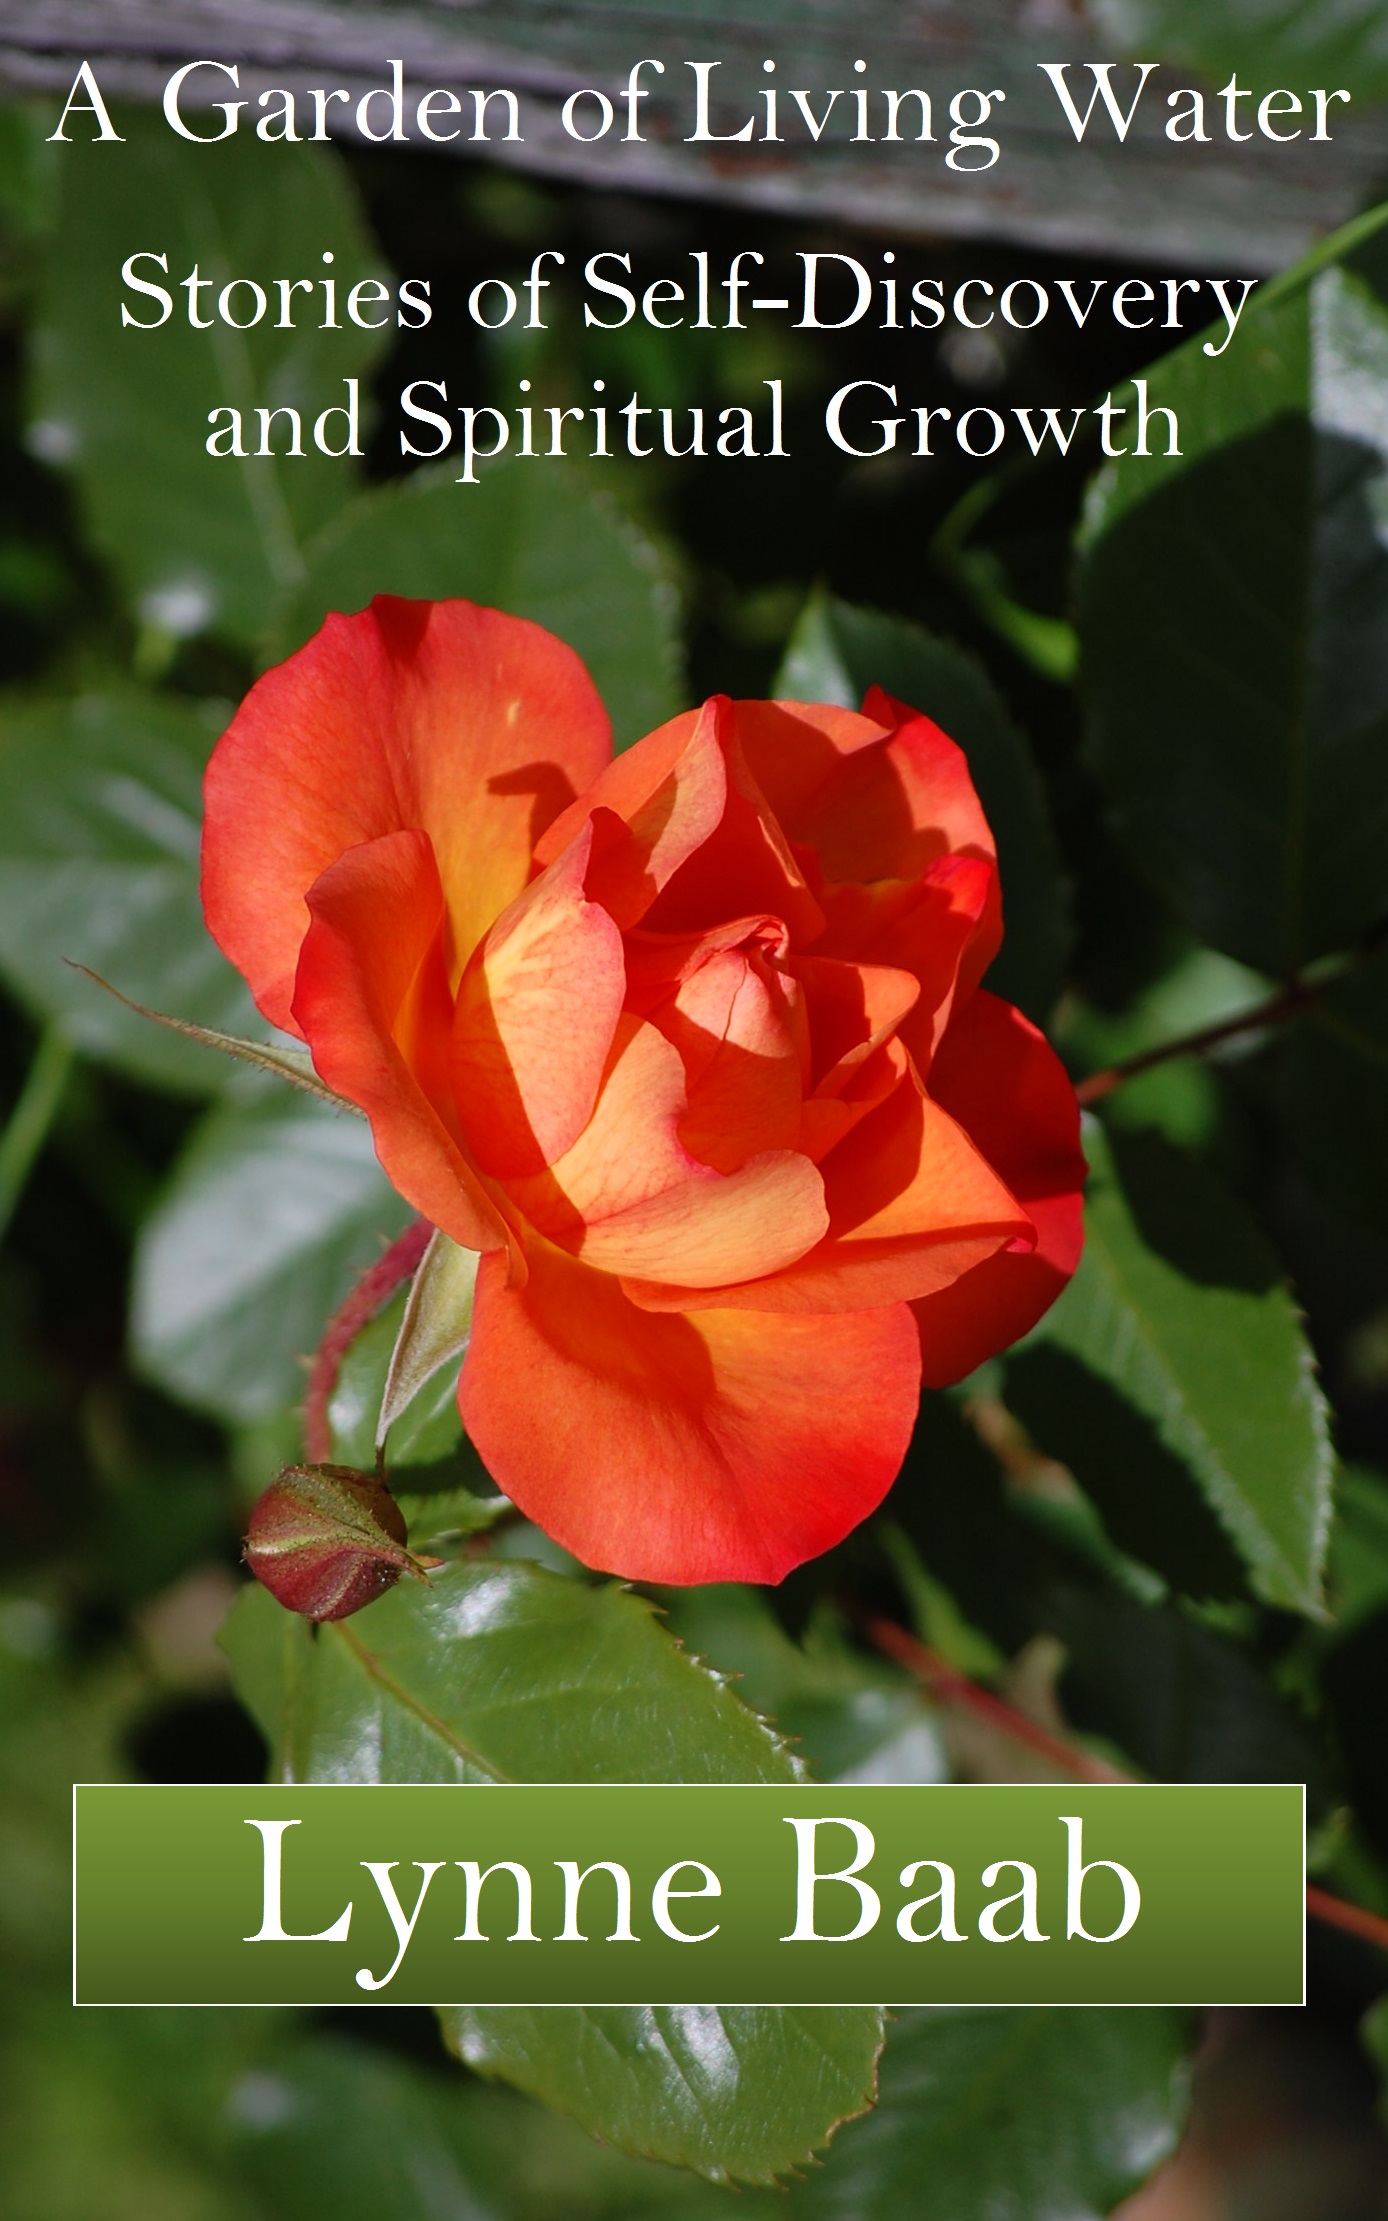 A Garden of Living Water: Stories of Self-Discovery and Spiritual Growth